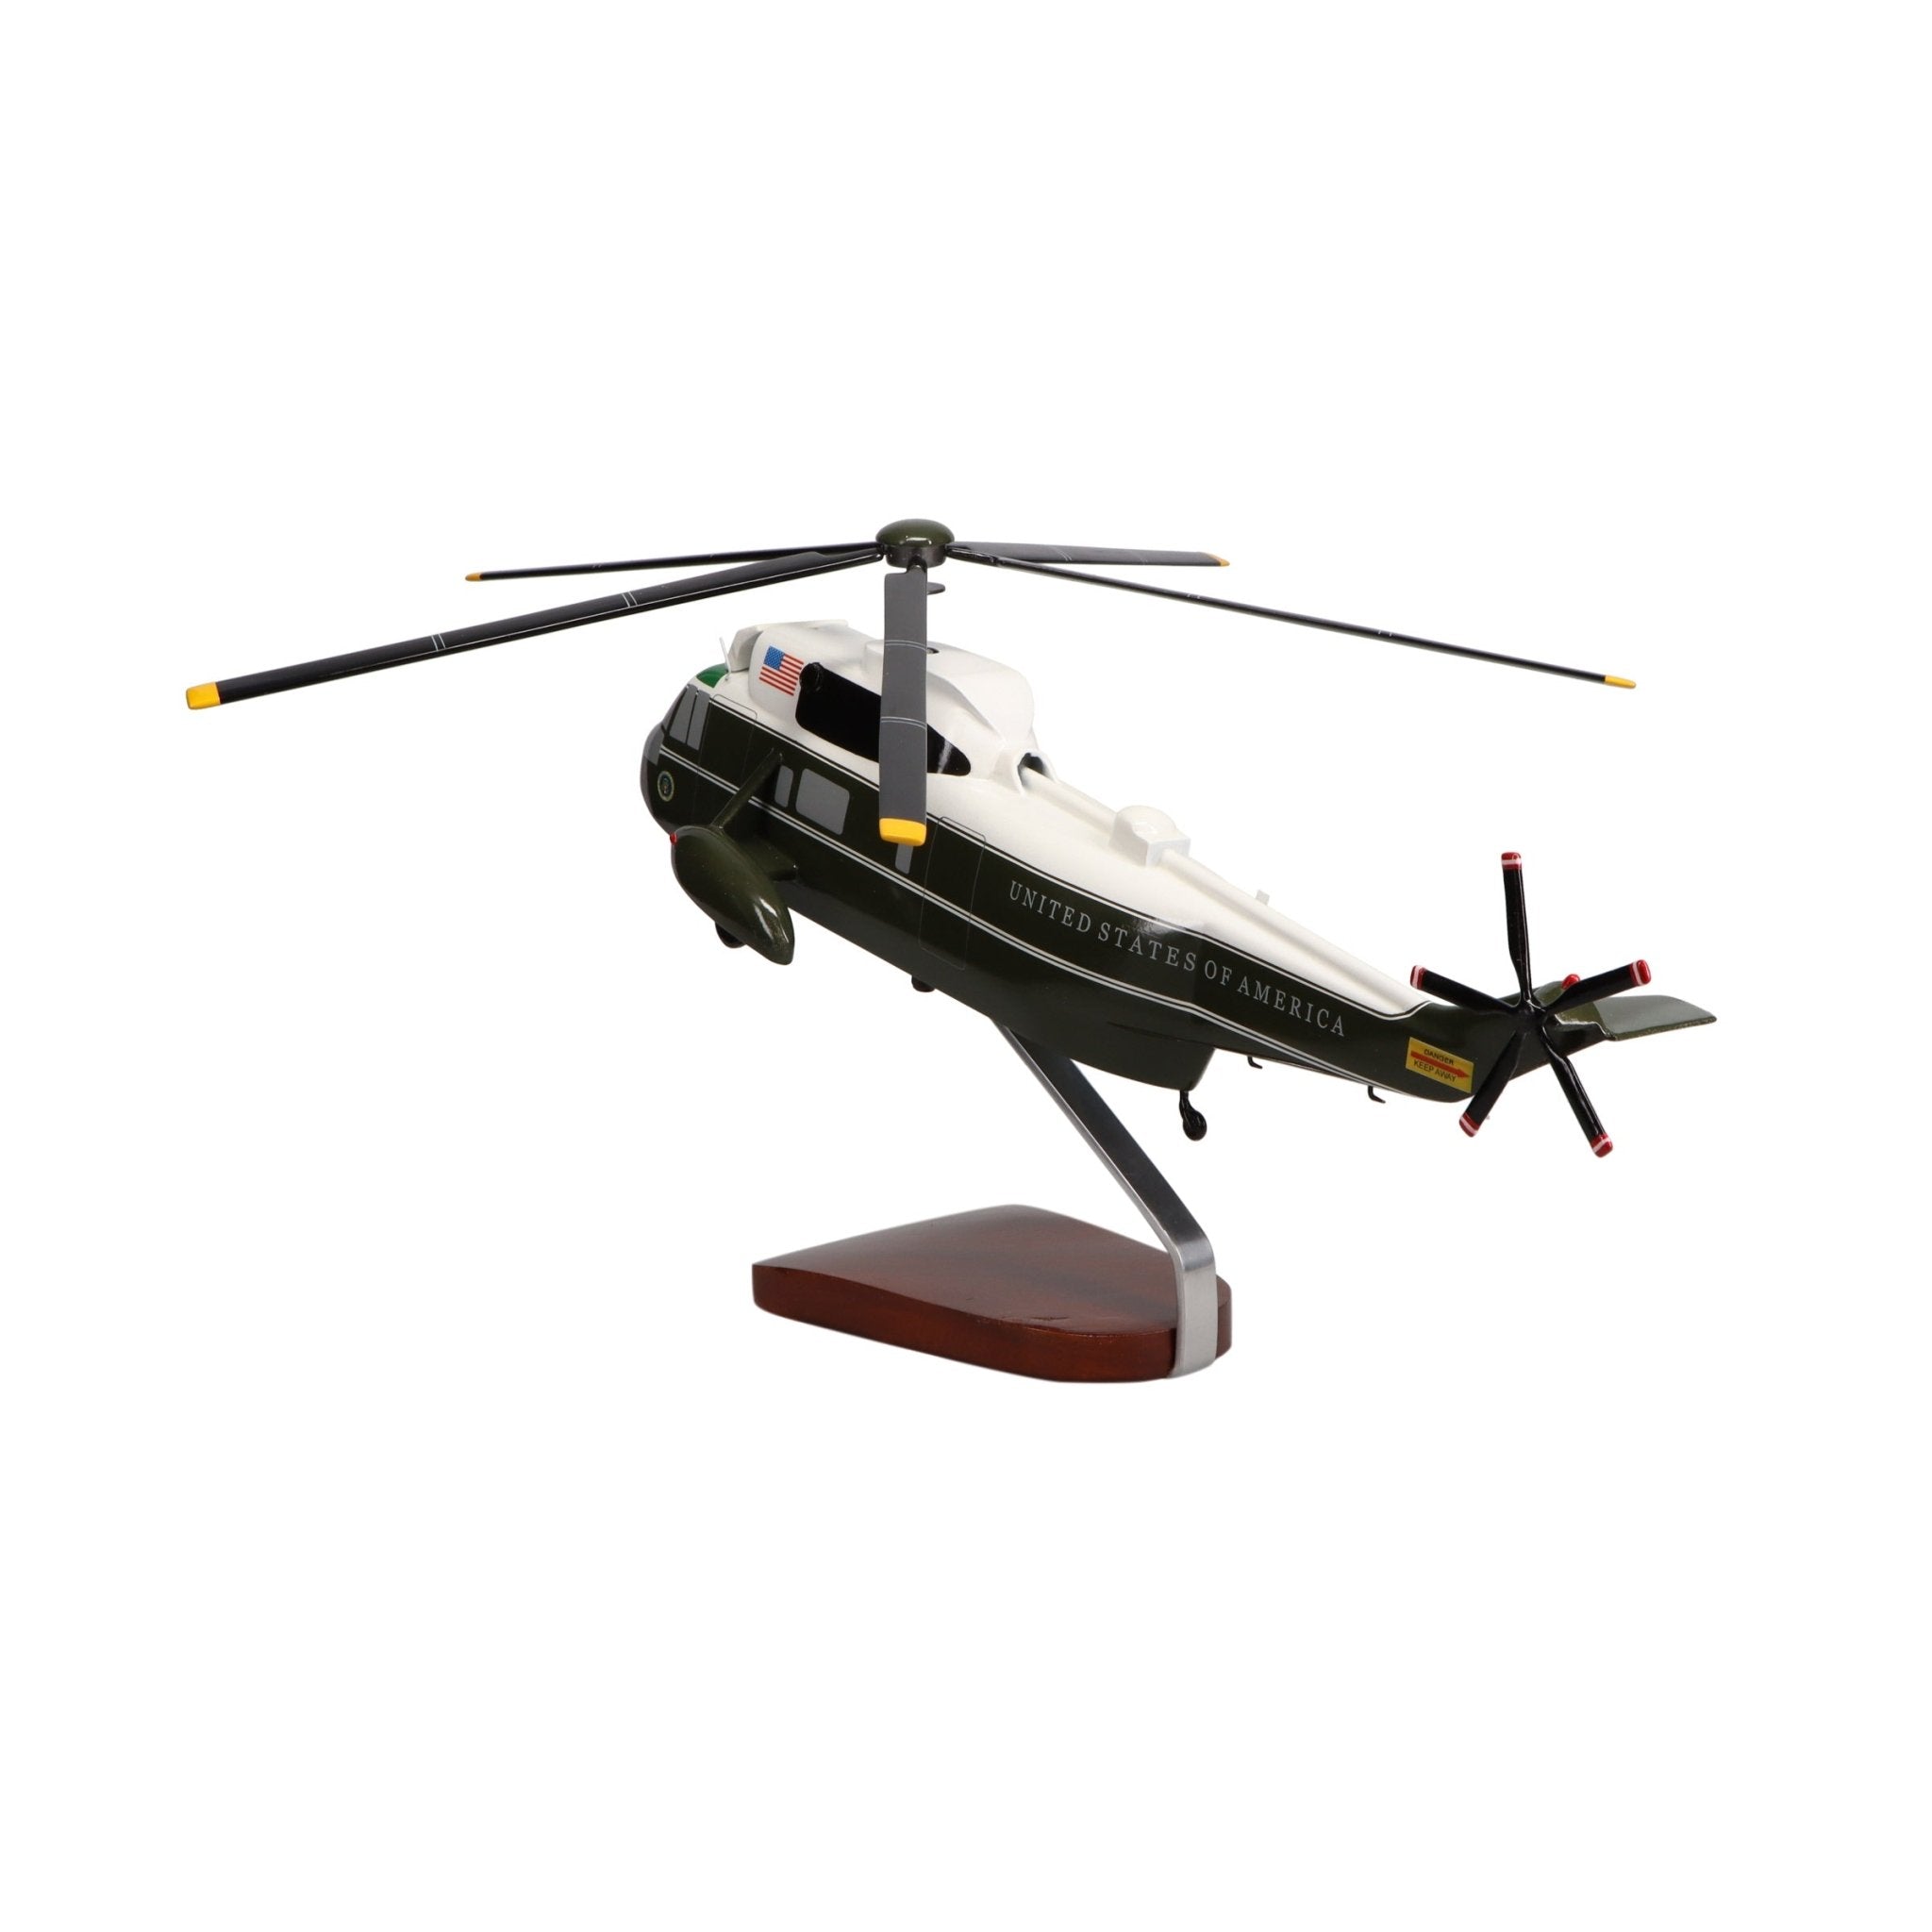 Sikorsky VH-3D Sea King Marine One Limited Edition Large Mahogany Model - PilotMall.com